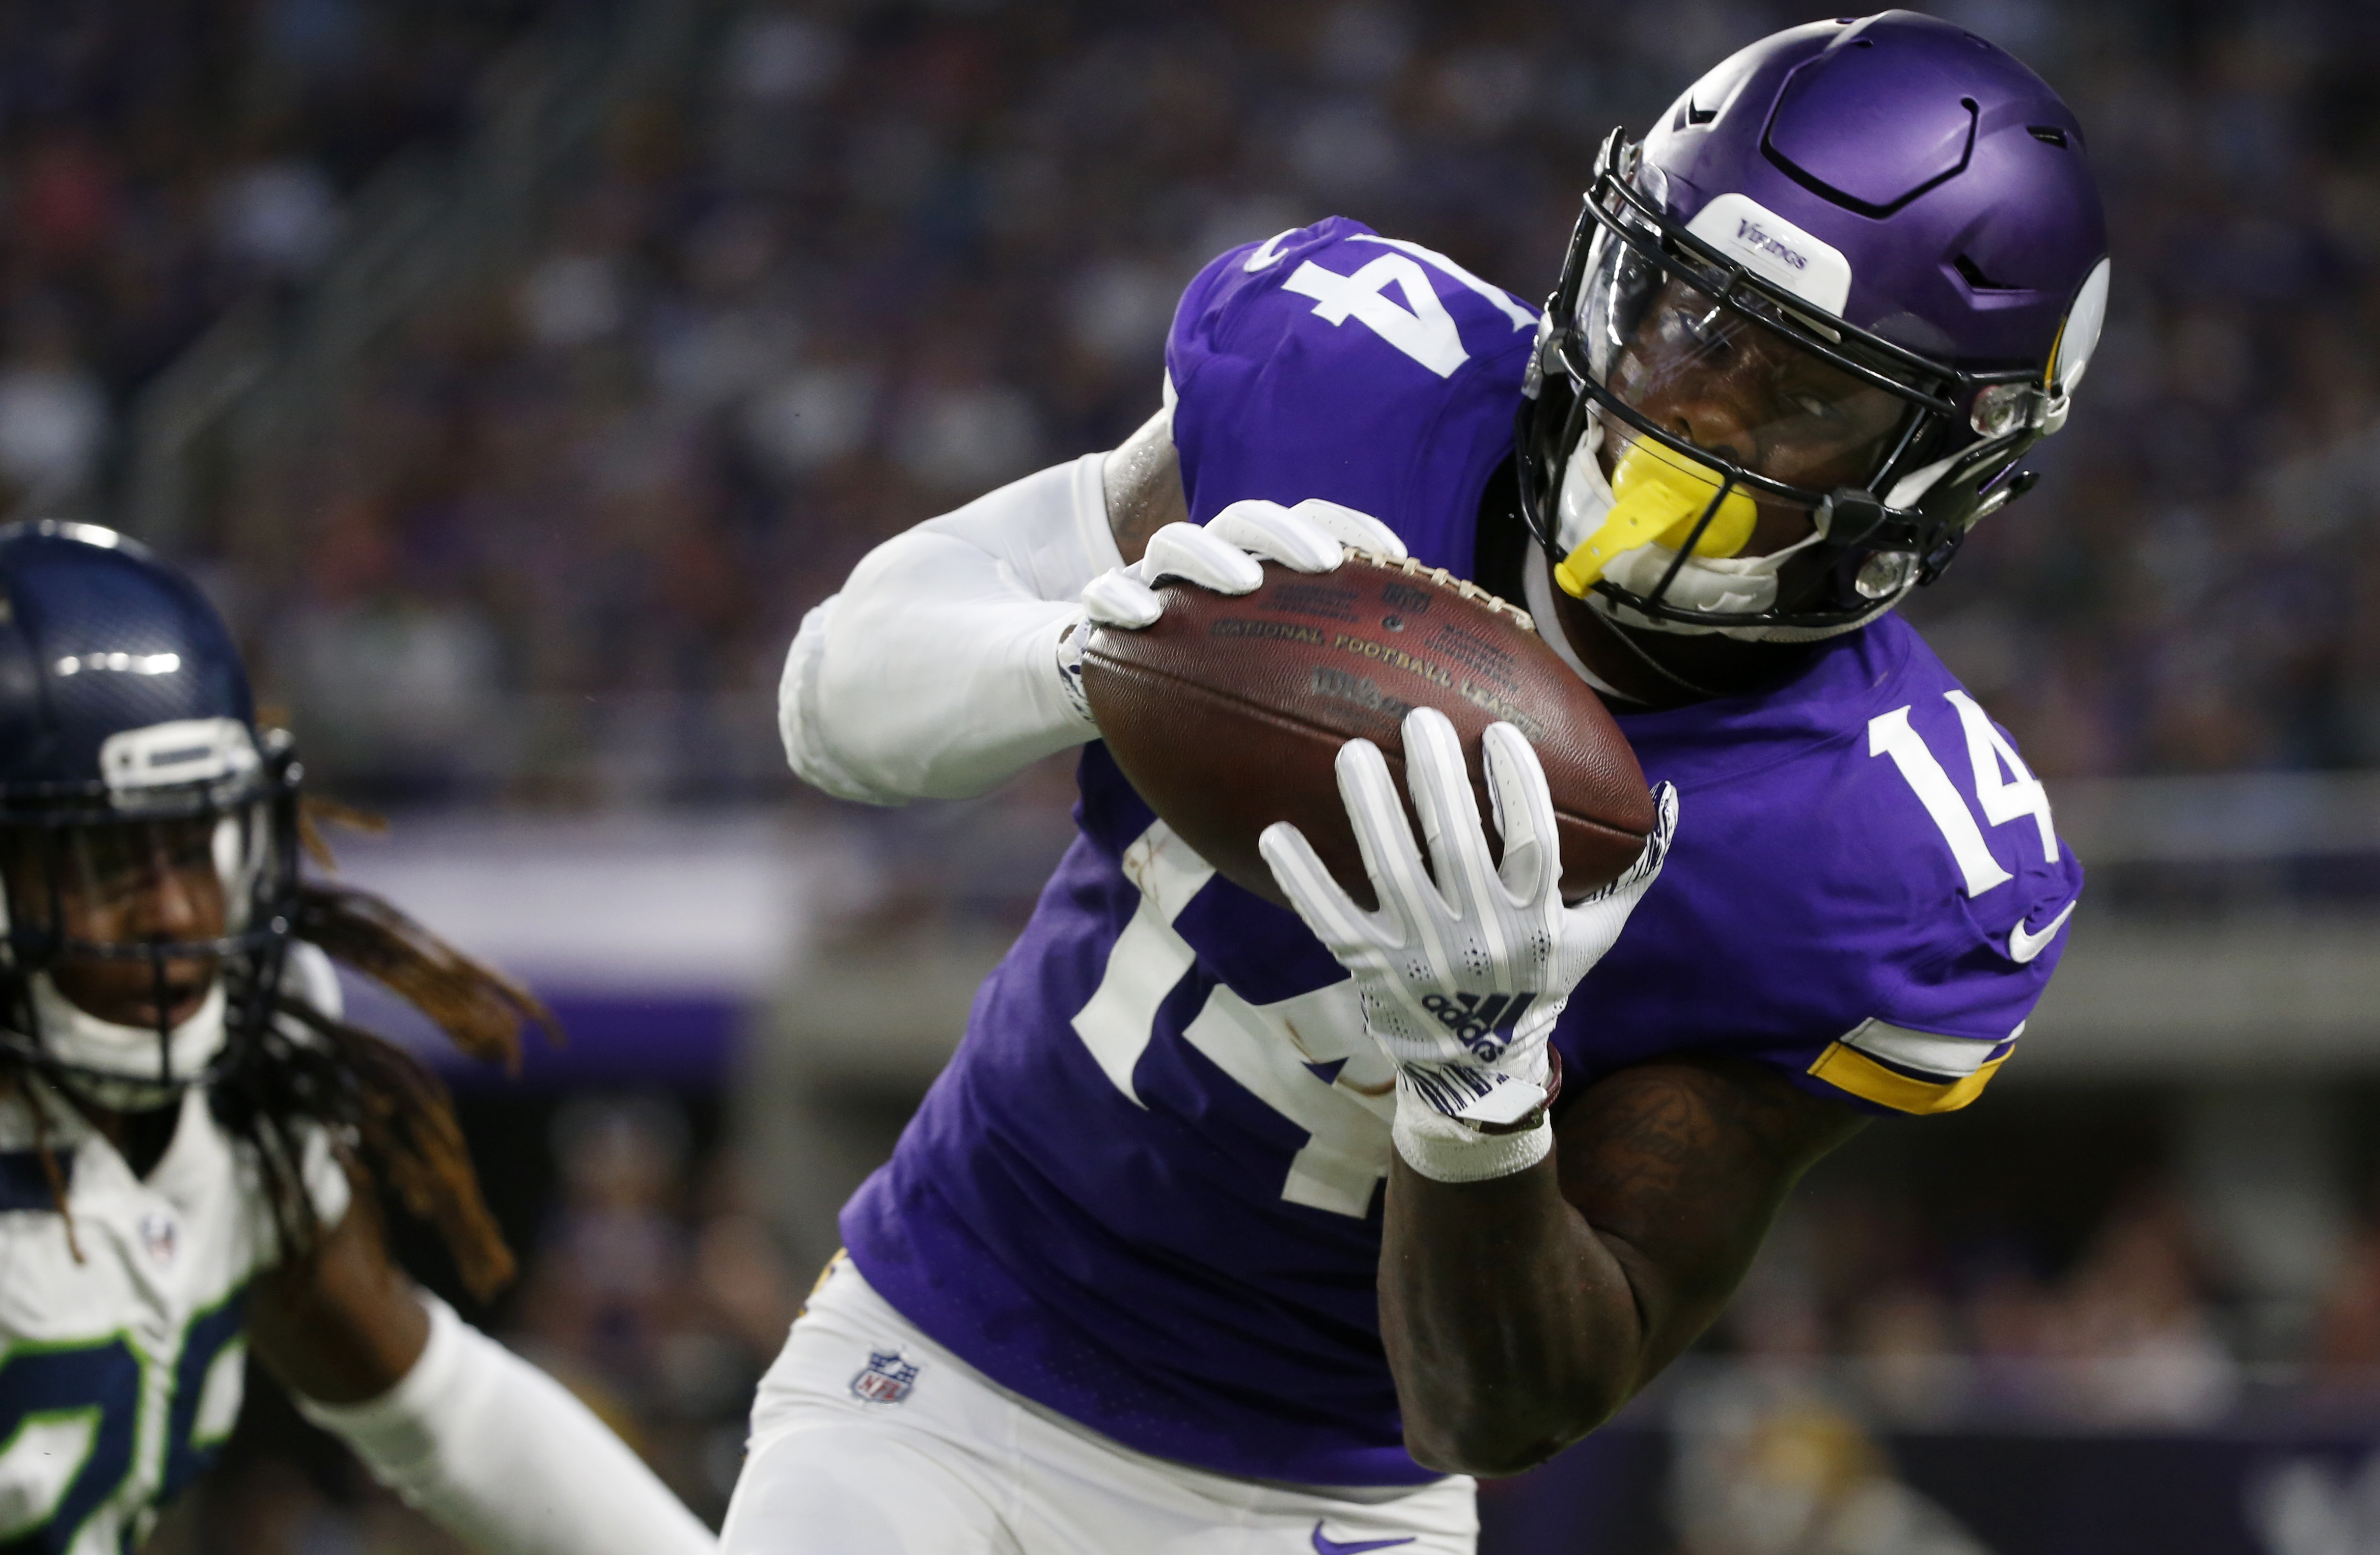 With Cousins early, Sloter late, Vikings top Seahawks 21-20